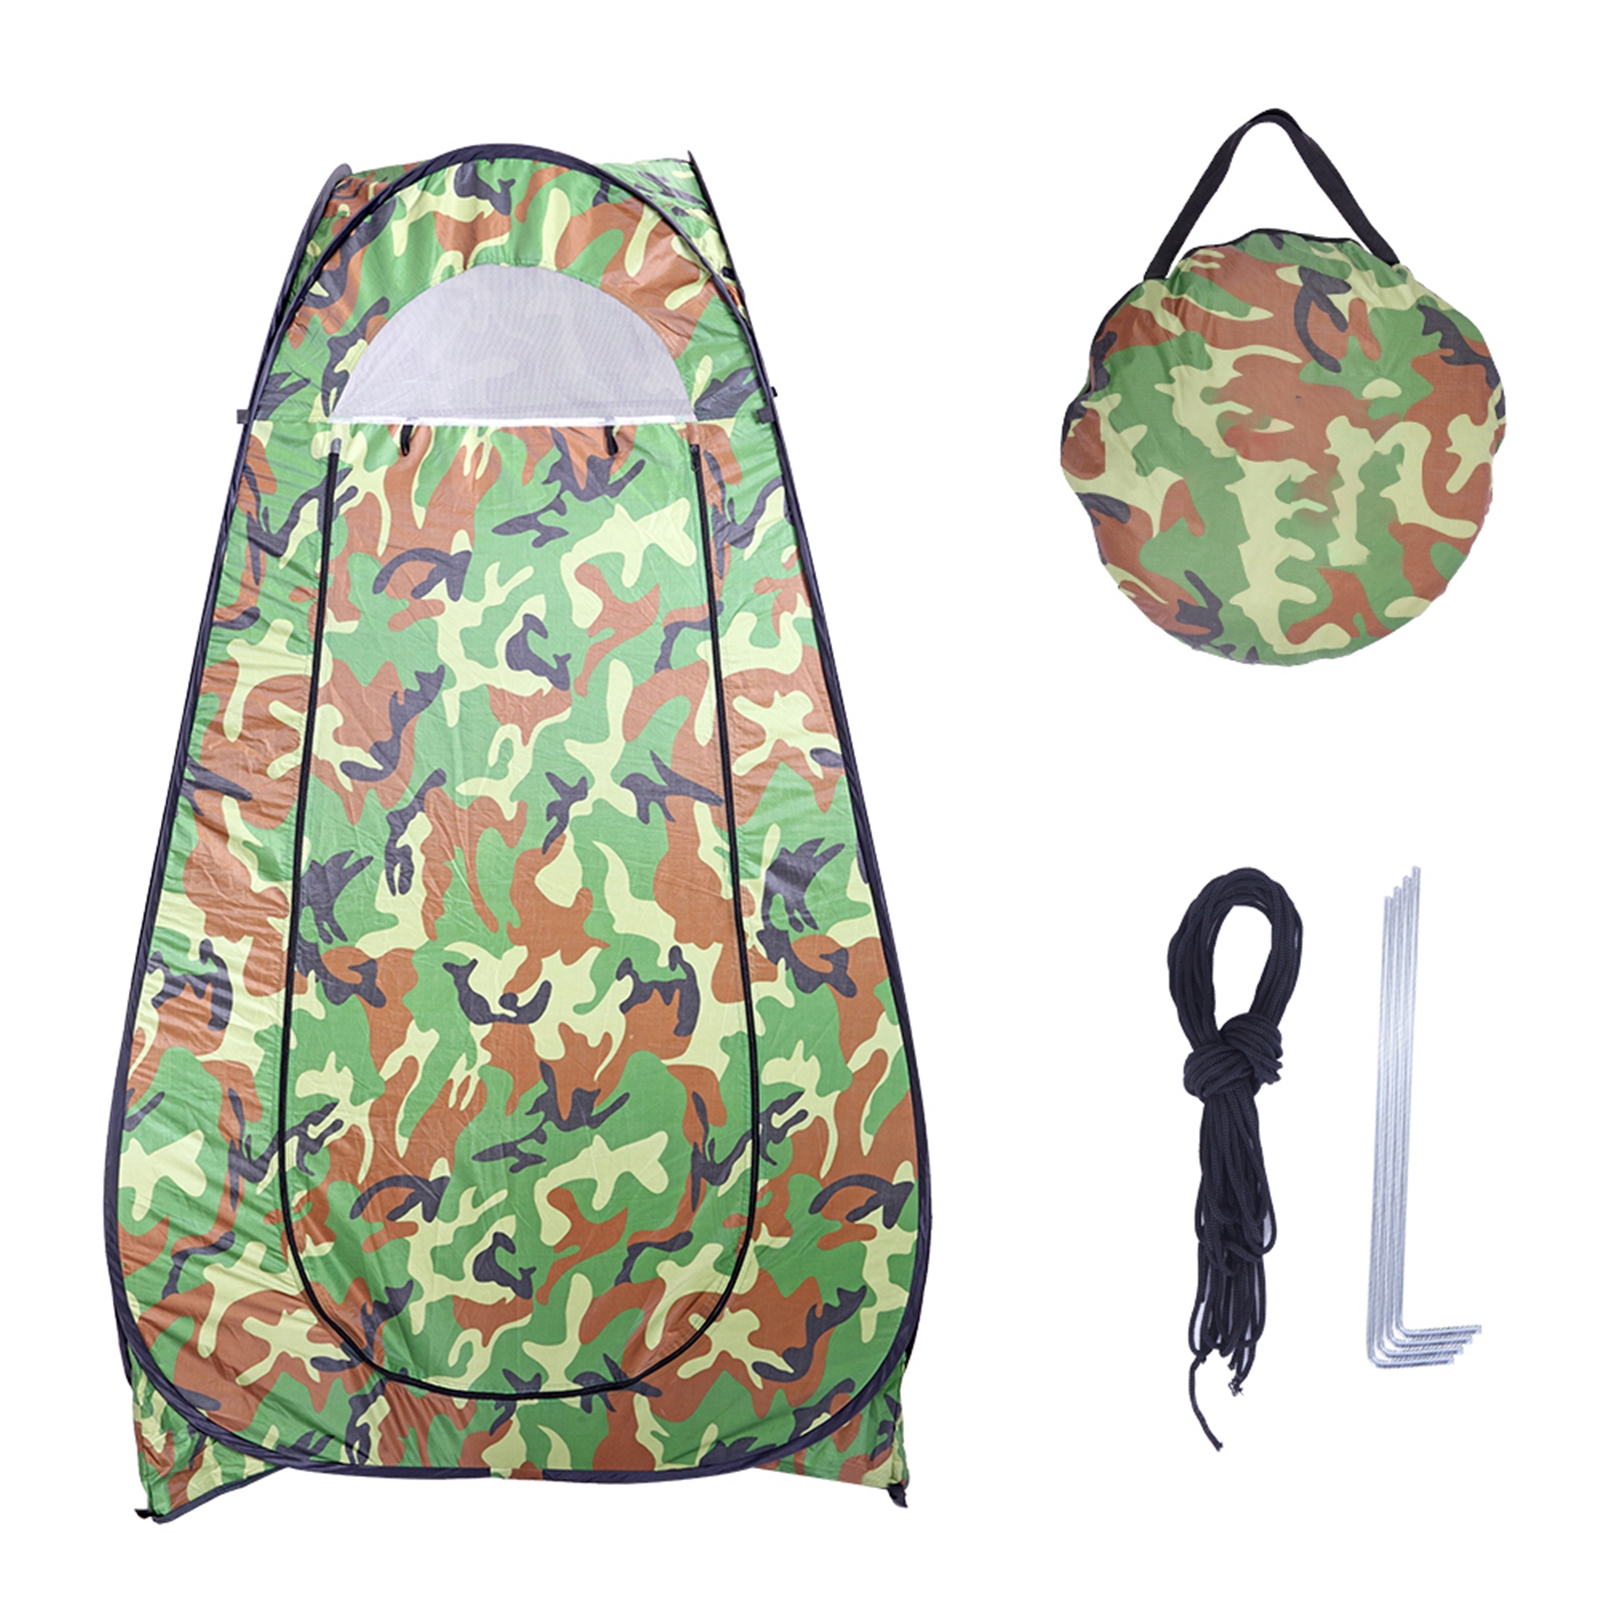 Portable Privacy Tent, Pop-Up Dressing Room Camping Shower Tent for Camping Picnic, Camouflage - image 3 of 7